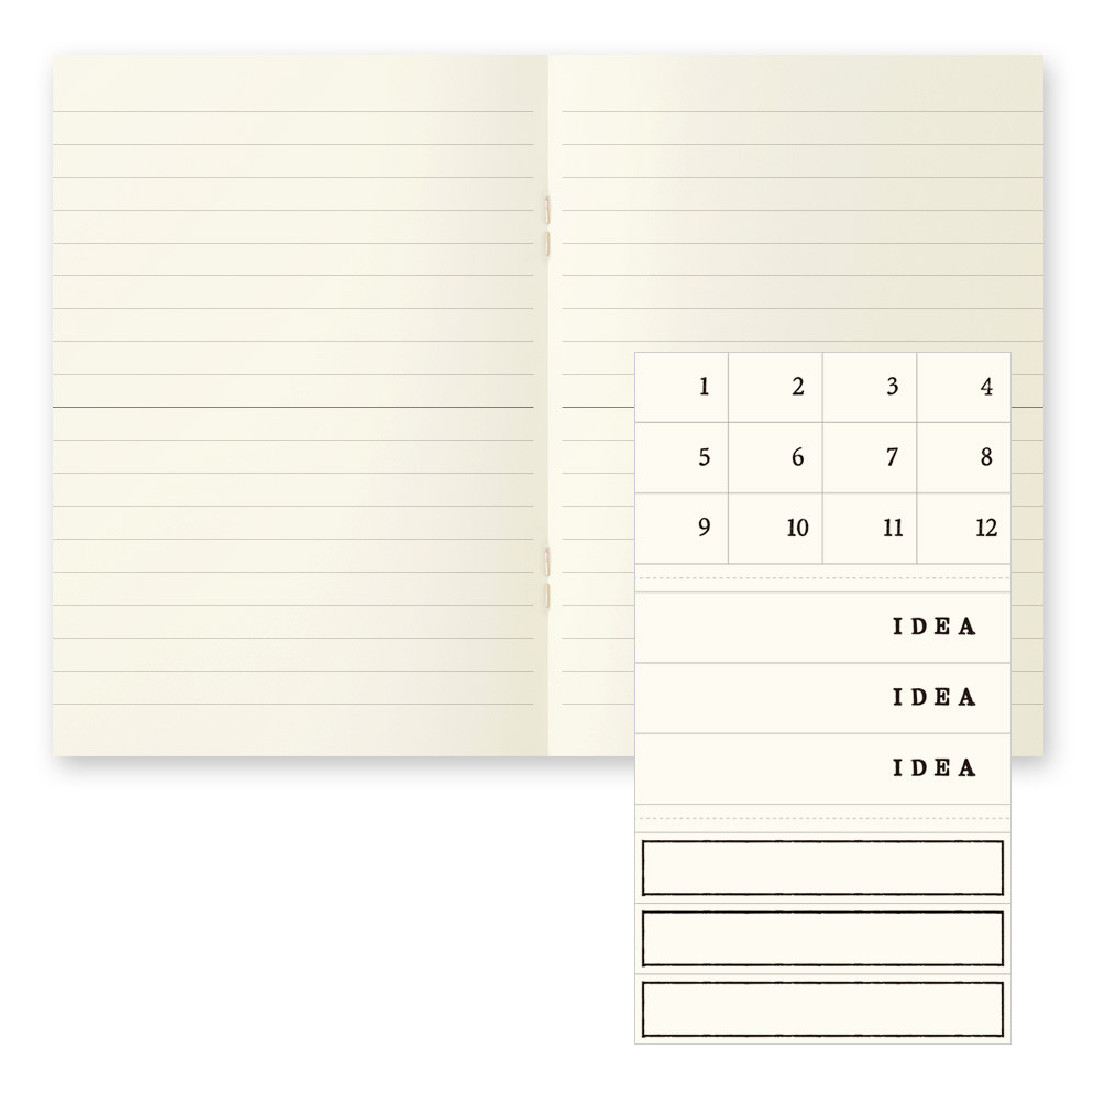 Midori MD Notebook Light A6 148x105mm, Lined, 3pcs pack, Label stickers, Saddle Stitched, 48 pages each, 15298006